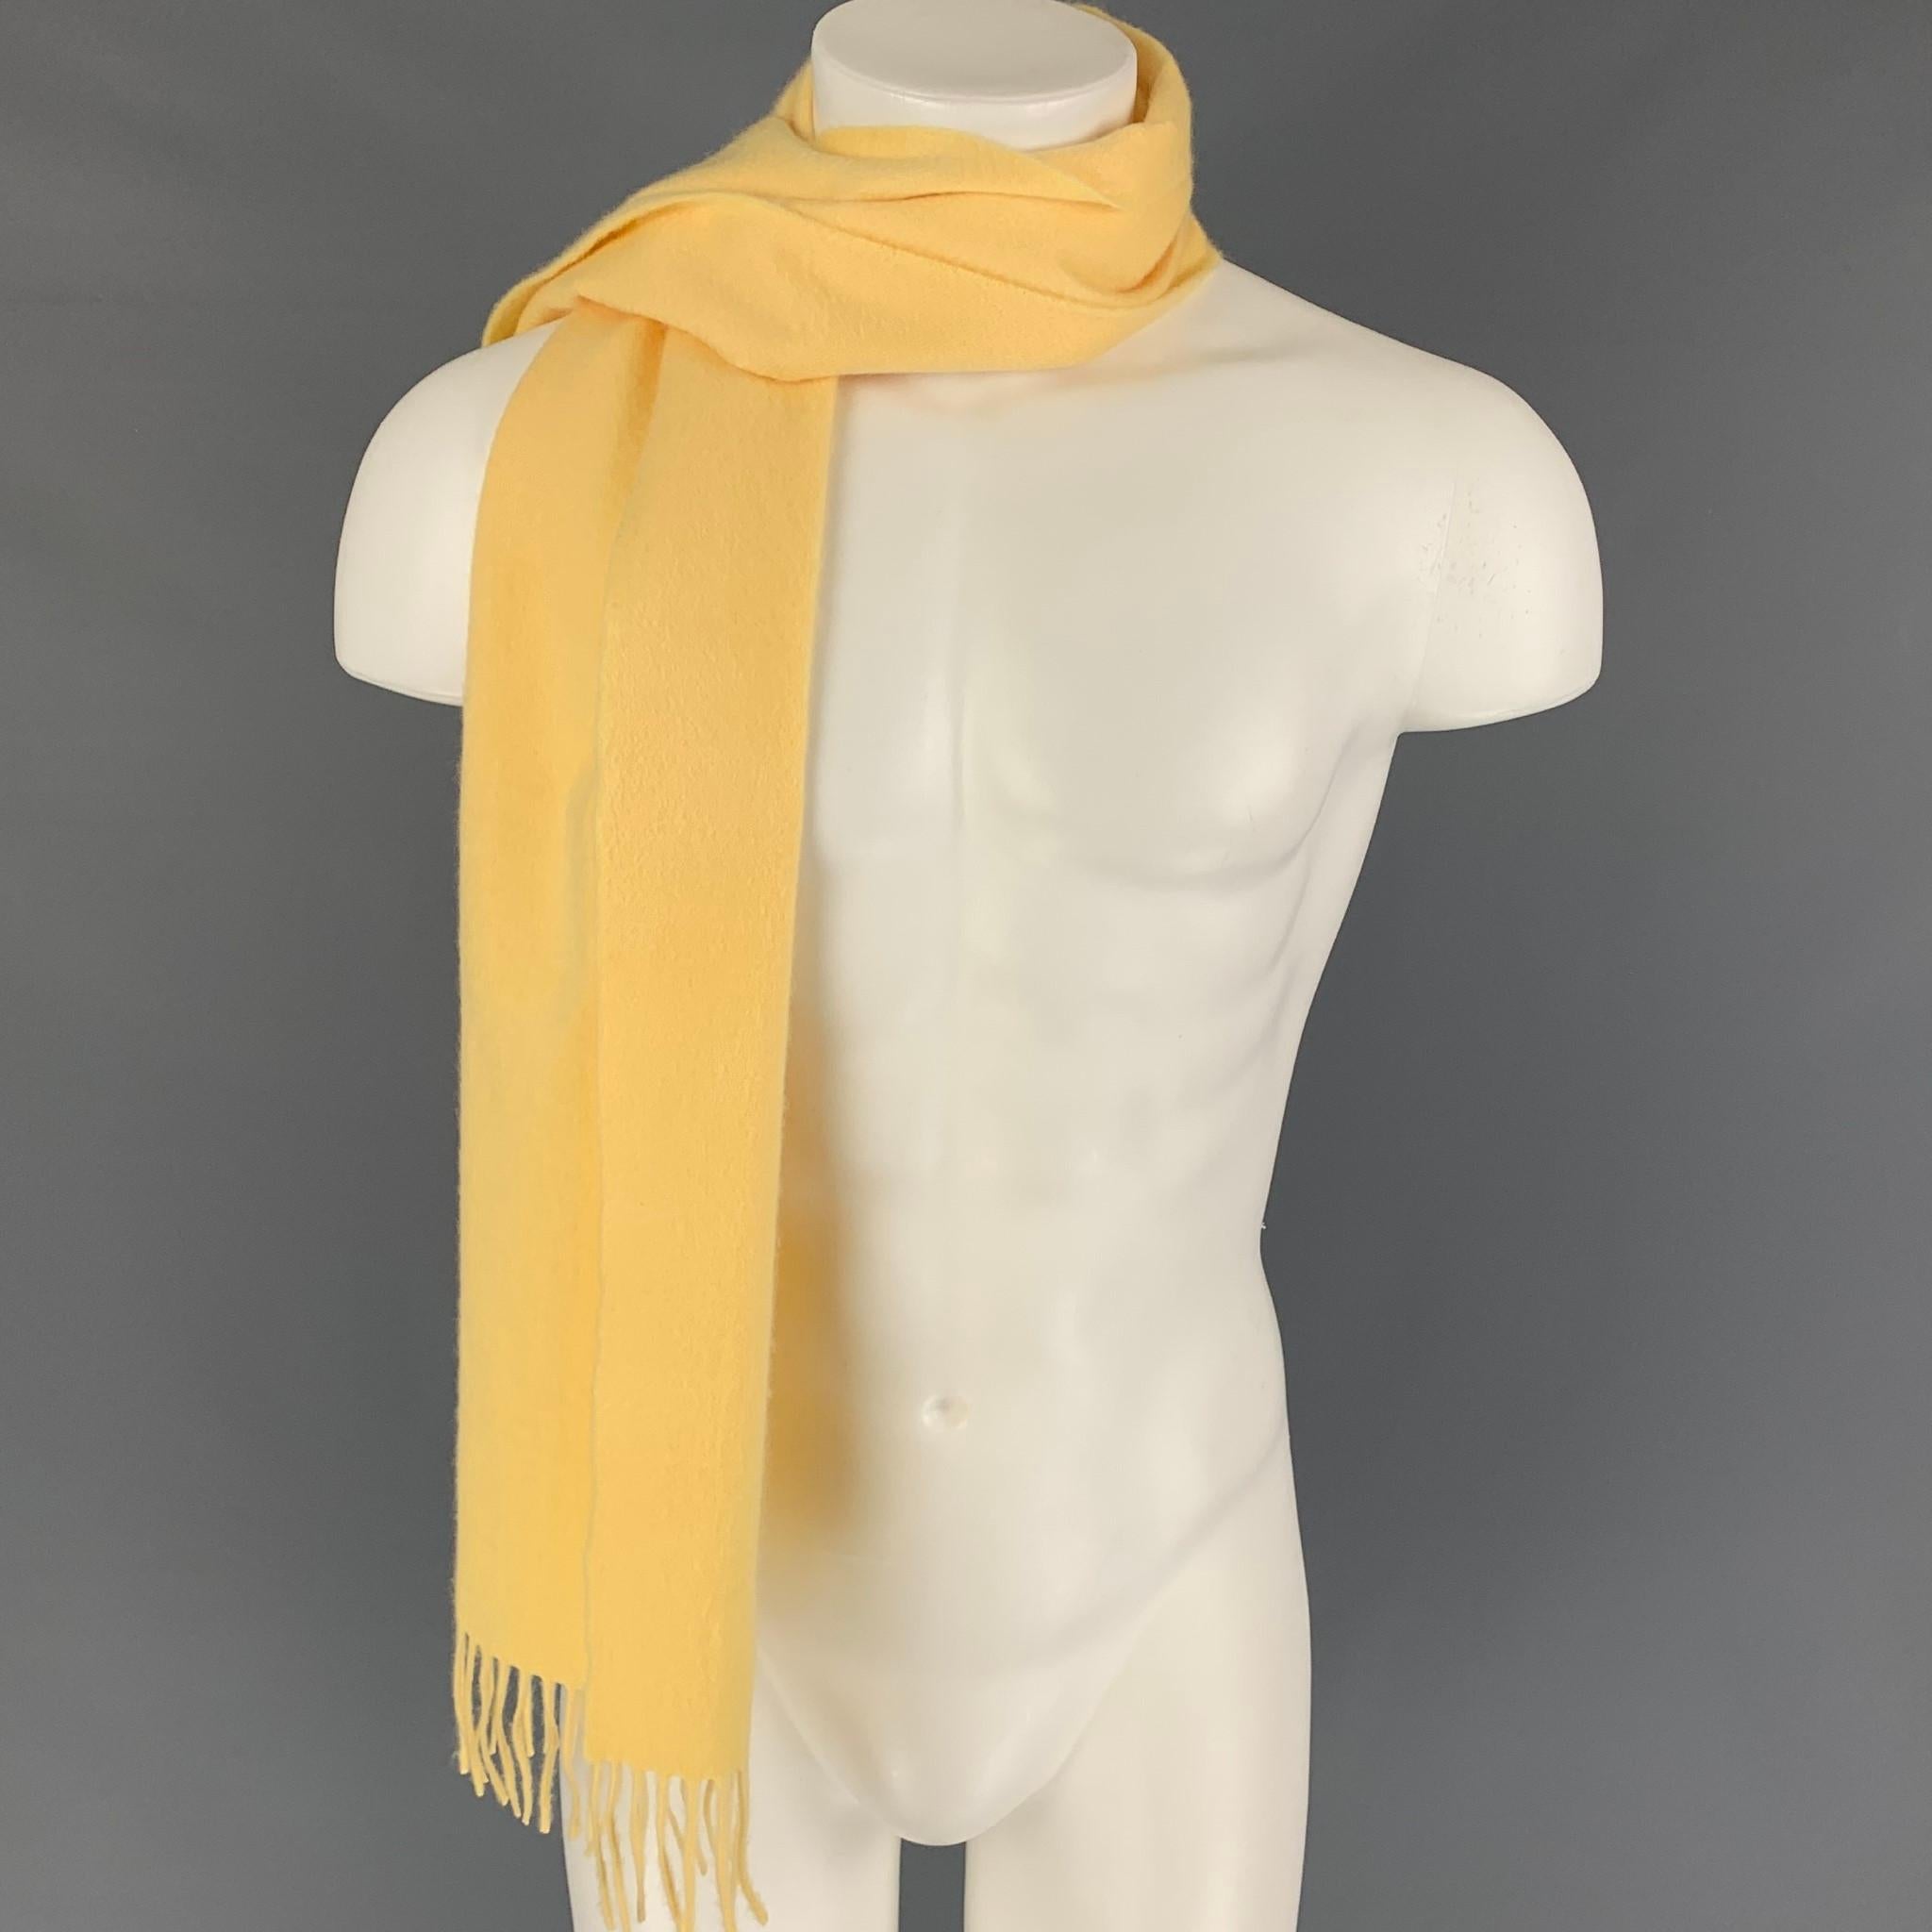 SULKA scarf comes in a yellow cashmere featuring a fringe trim. 

Very Good Pre-Owned Condition.

Measurements: 55 in. x 12.5 in.